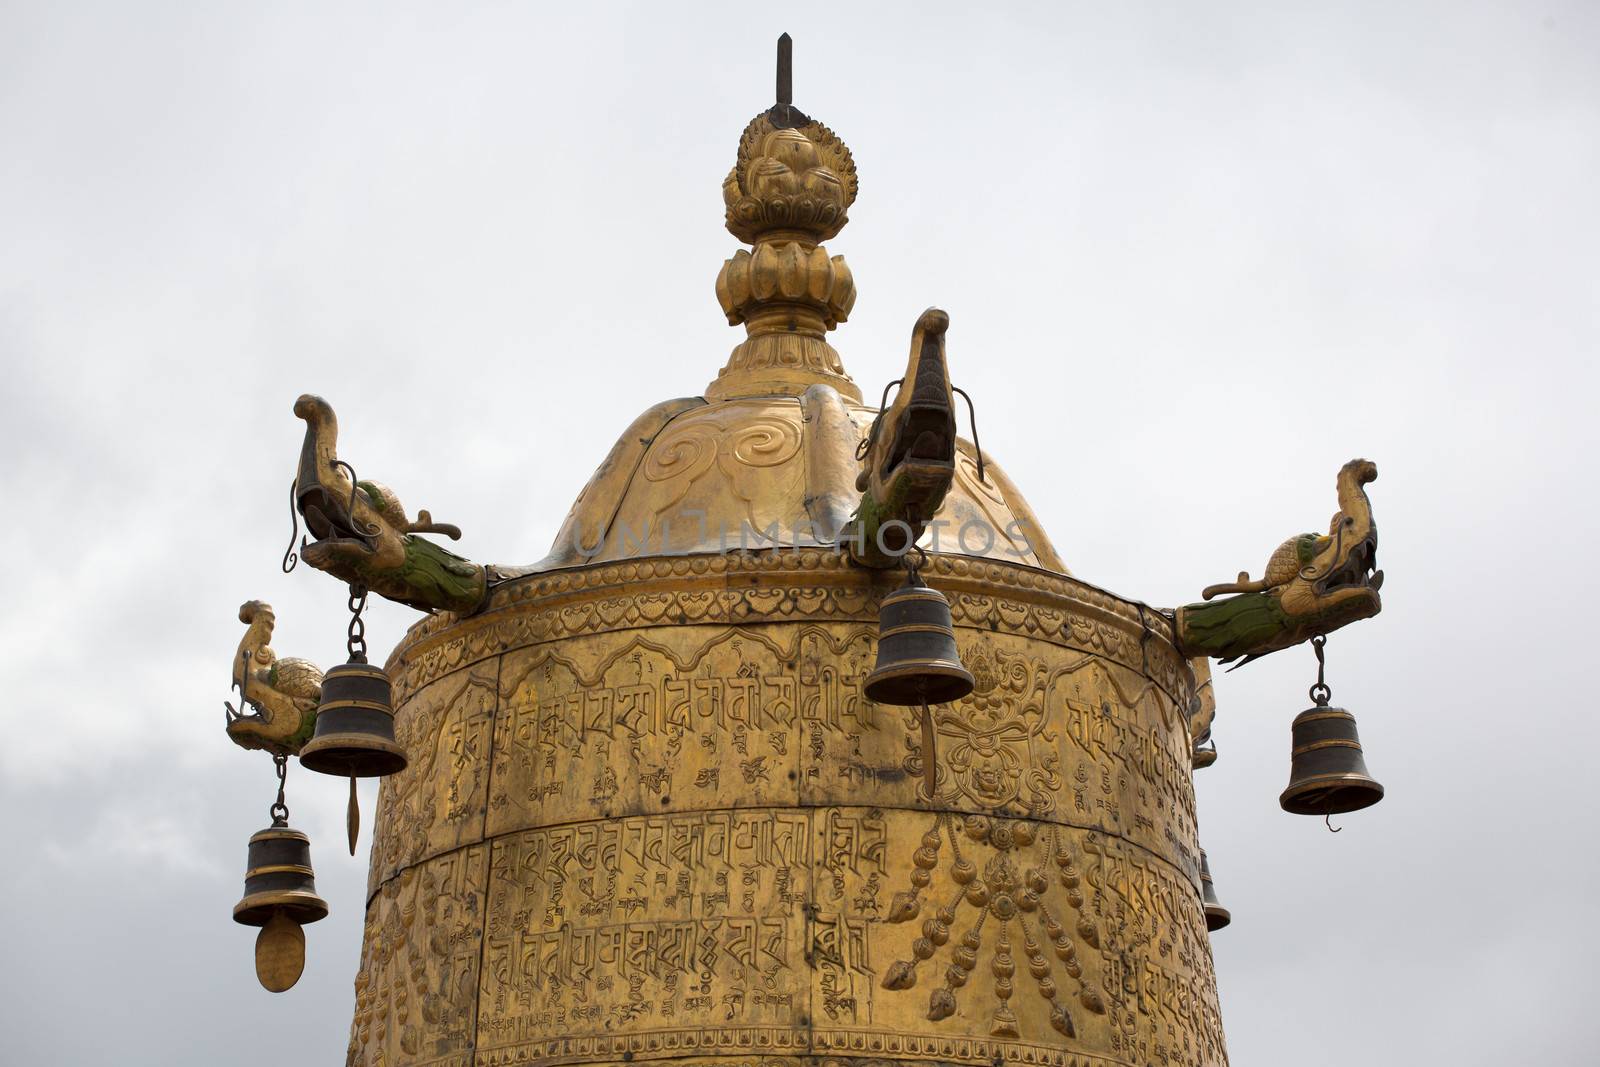 Religious gold symbol on top of a temple in Lhasa, China 2013